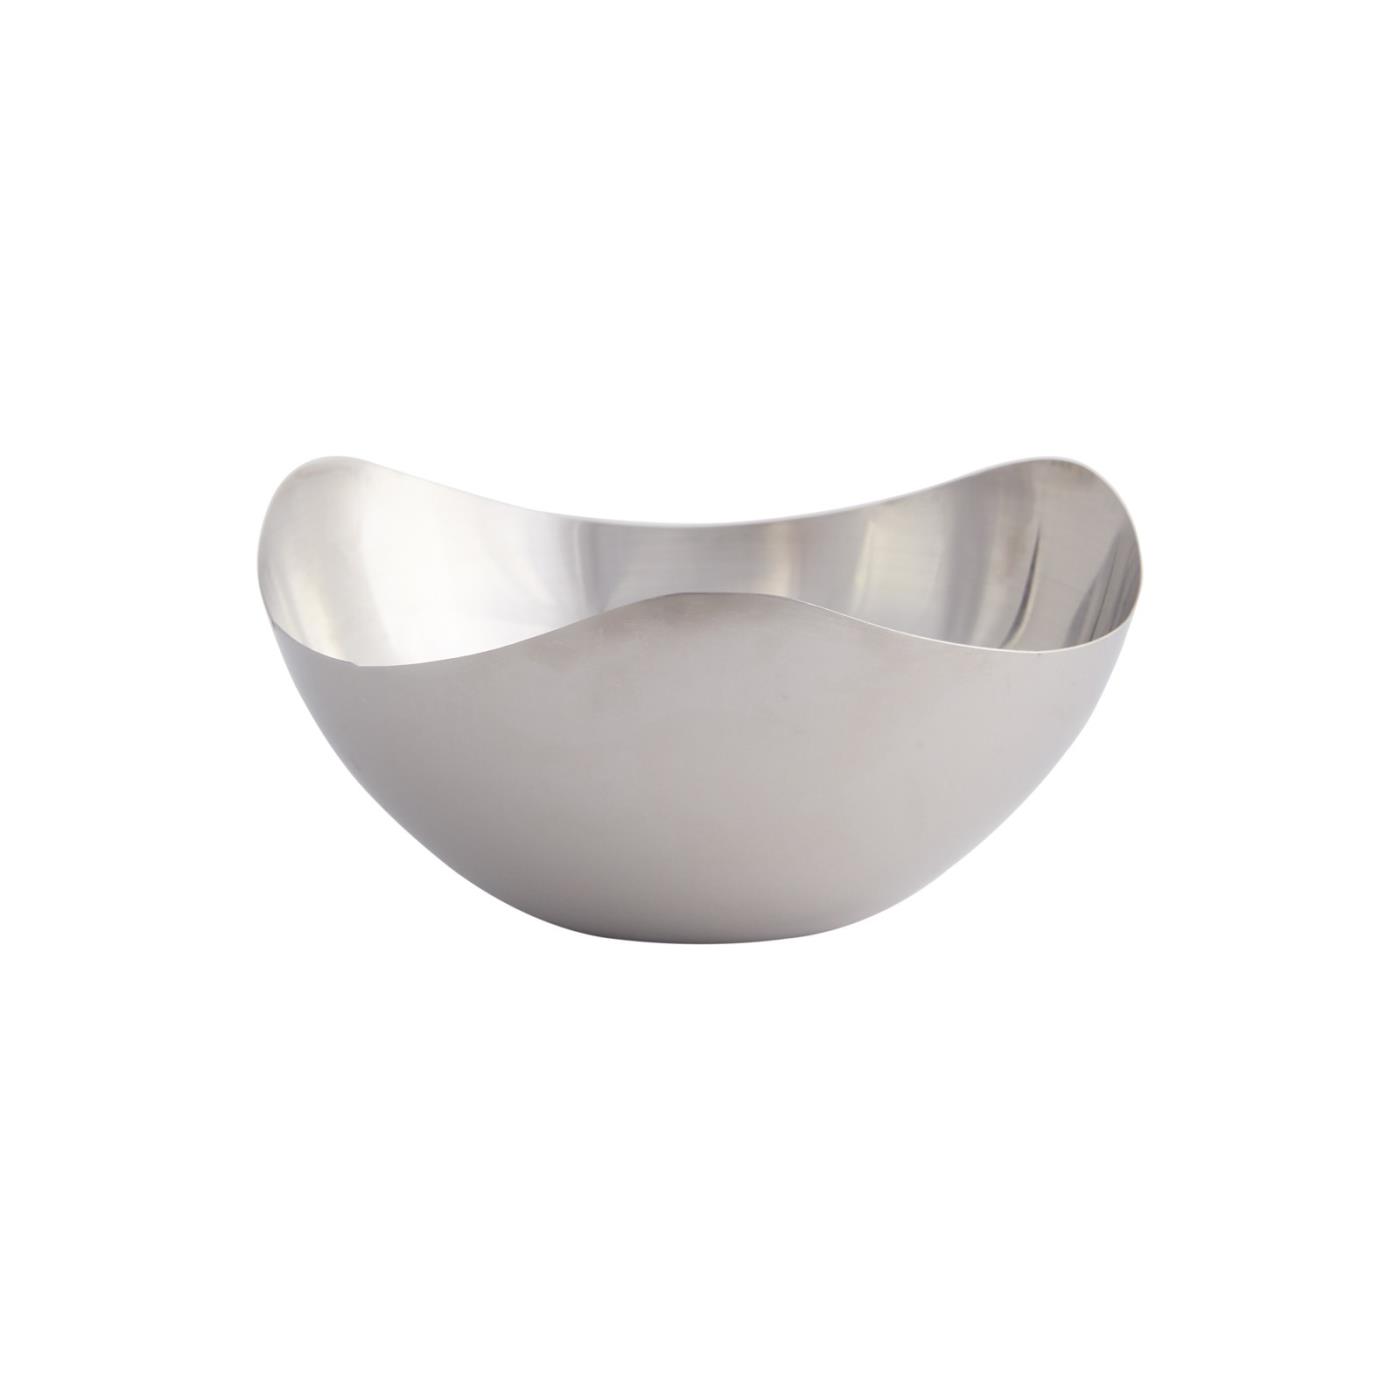 Stainless Steel Wave Bowl - 5.5"